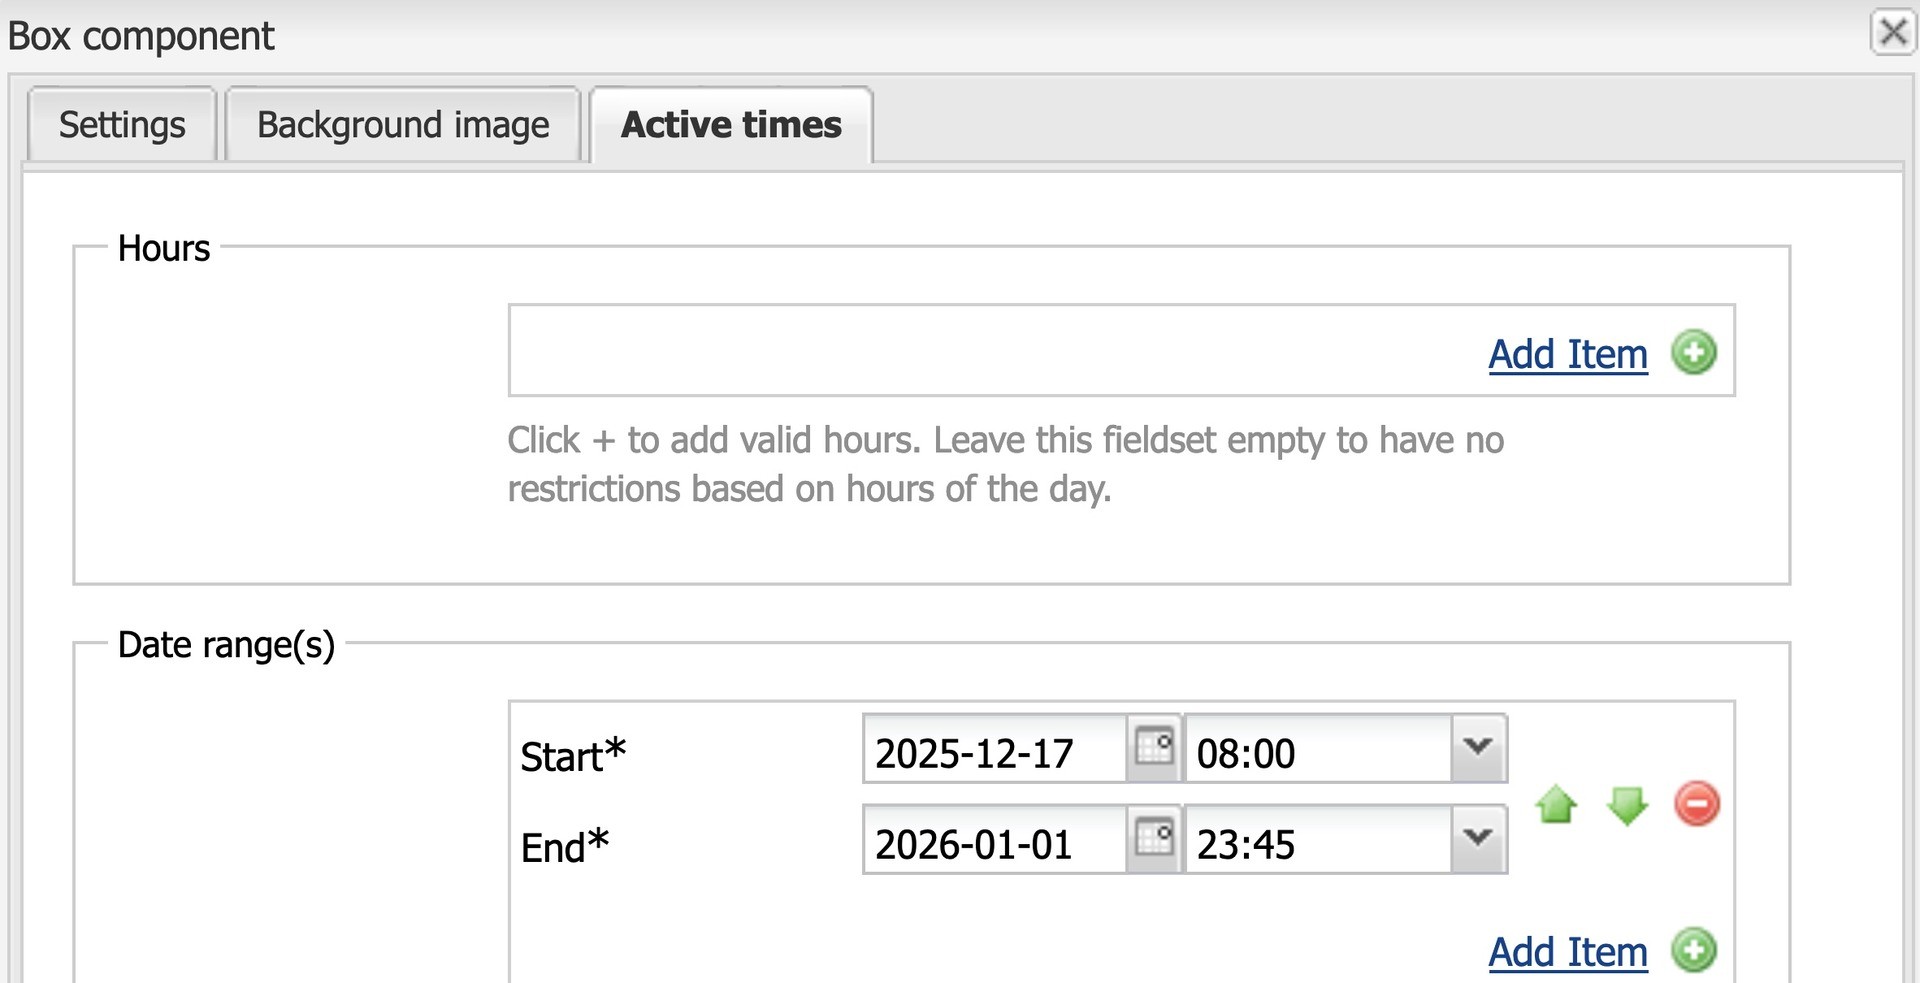 Screenshot of box component active times. Start date is set to 2025-12-17 and end date is 2026-01-01.